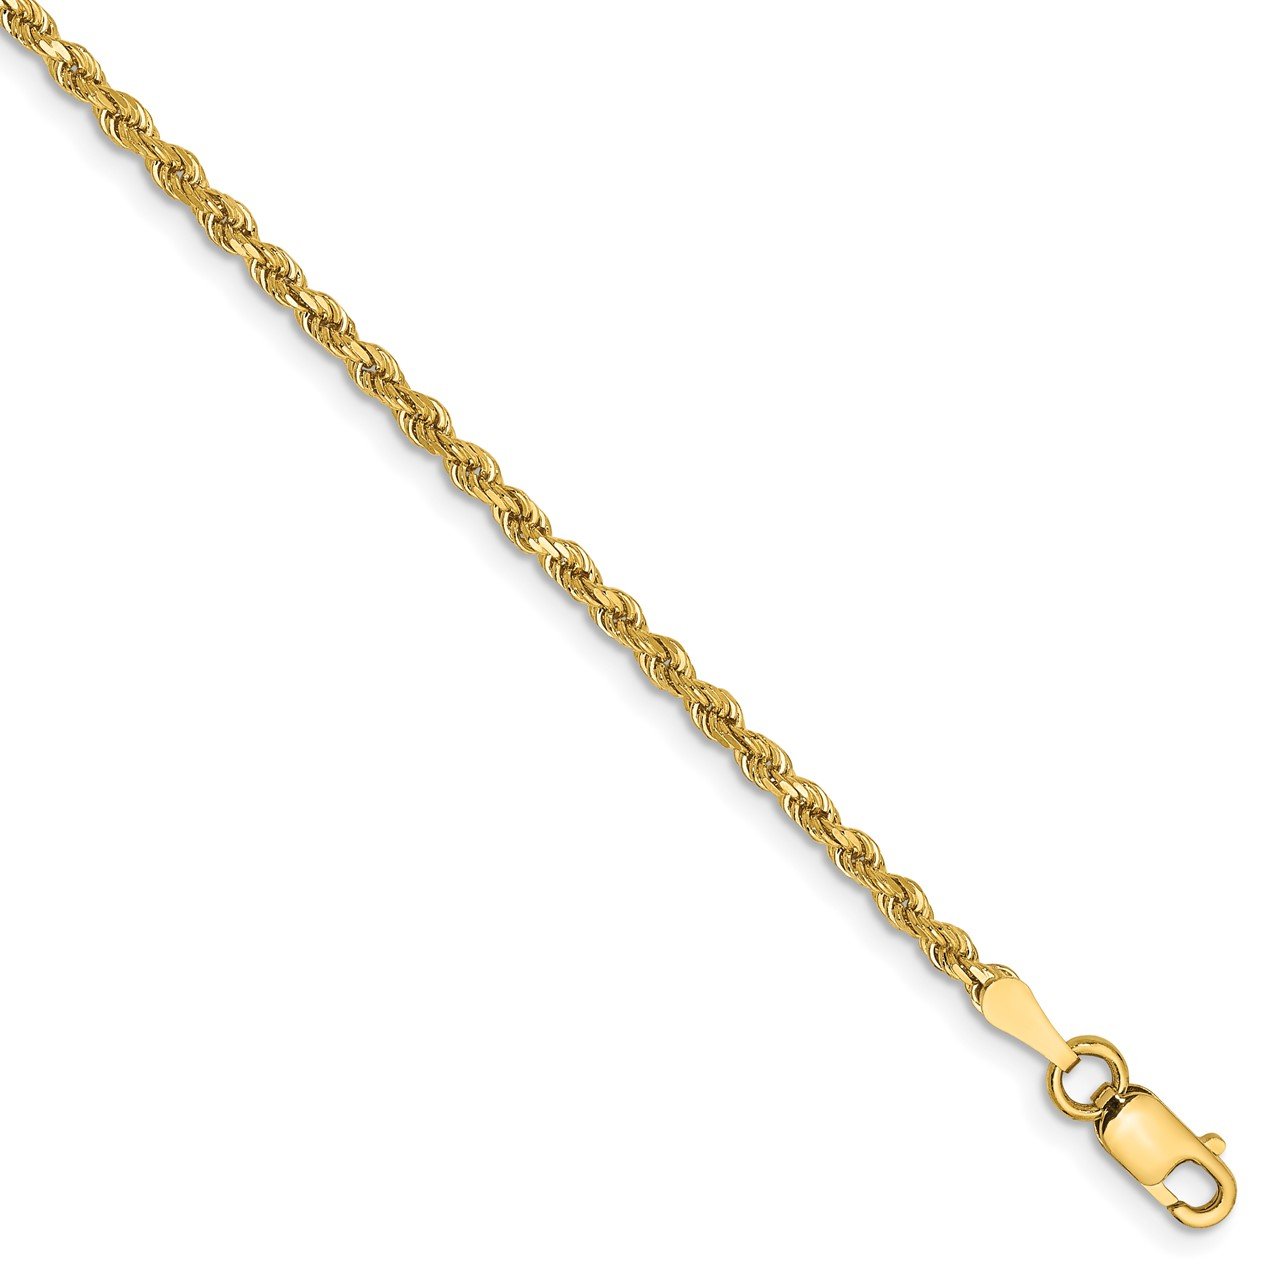 Jewelry Necklaces Chains 18k Leslies WG 1.15mm Solid D/C Cable Chain